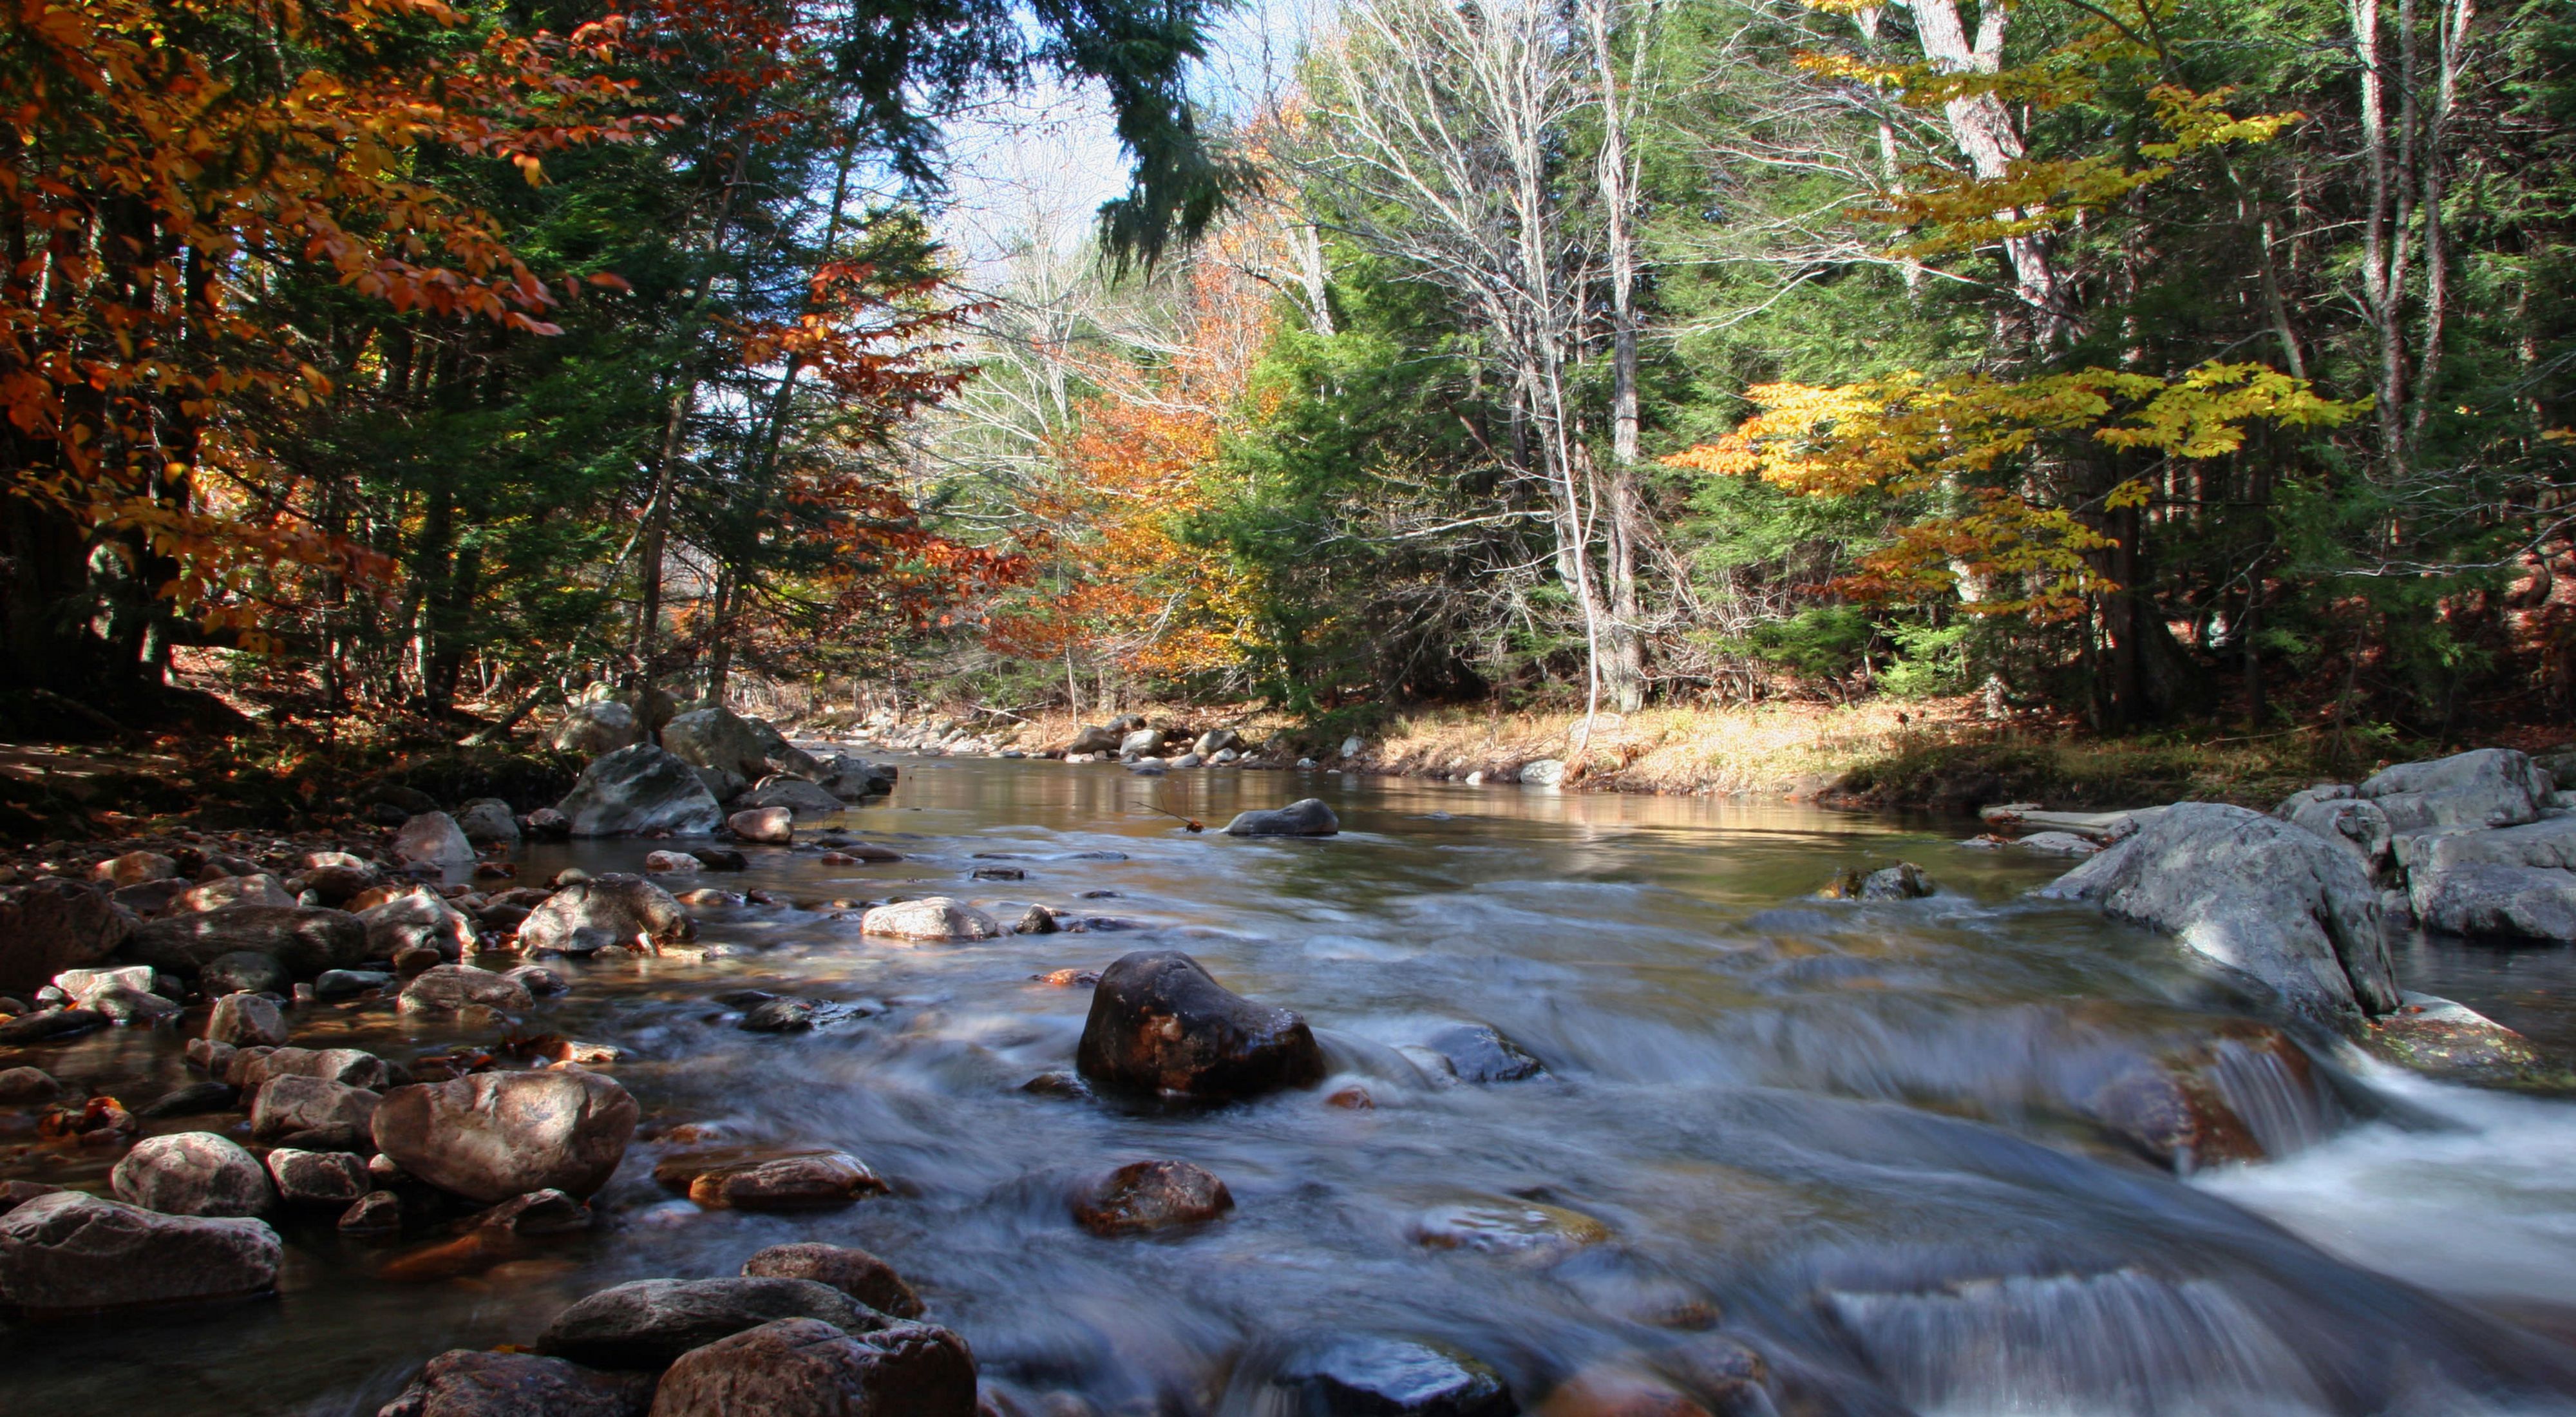 A river runs over some rocks through the forest. Some of the trees are turning yellow and orange.